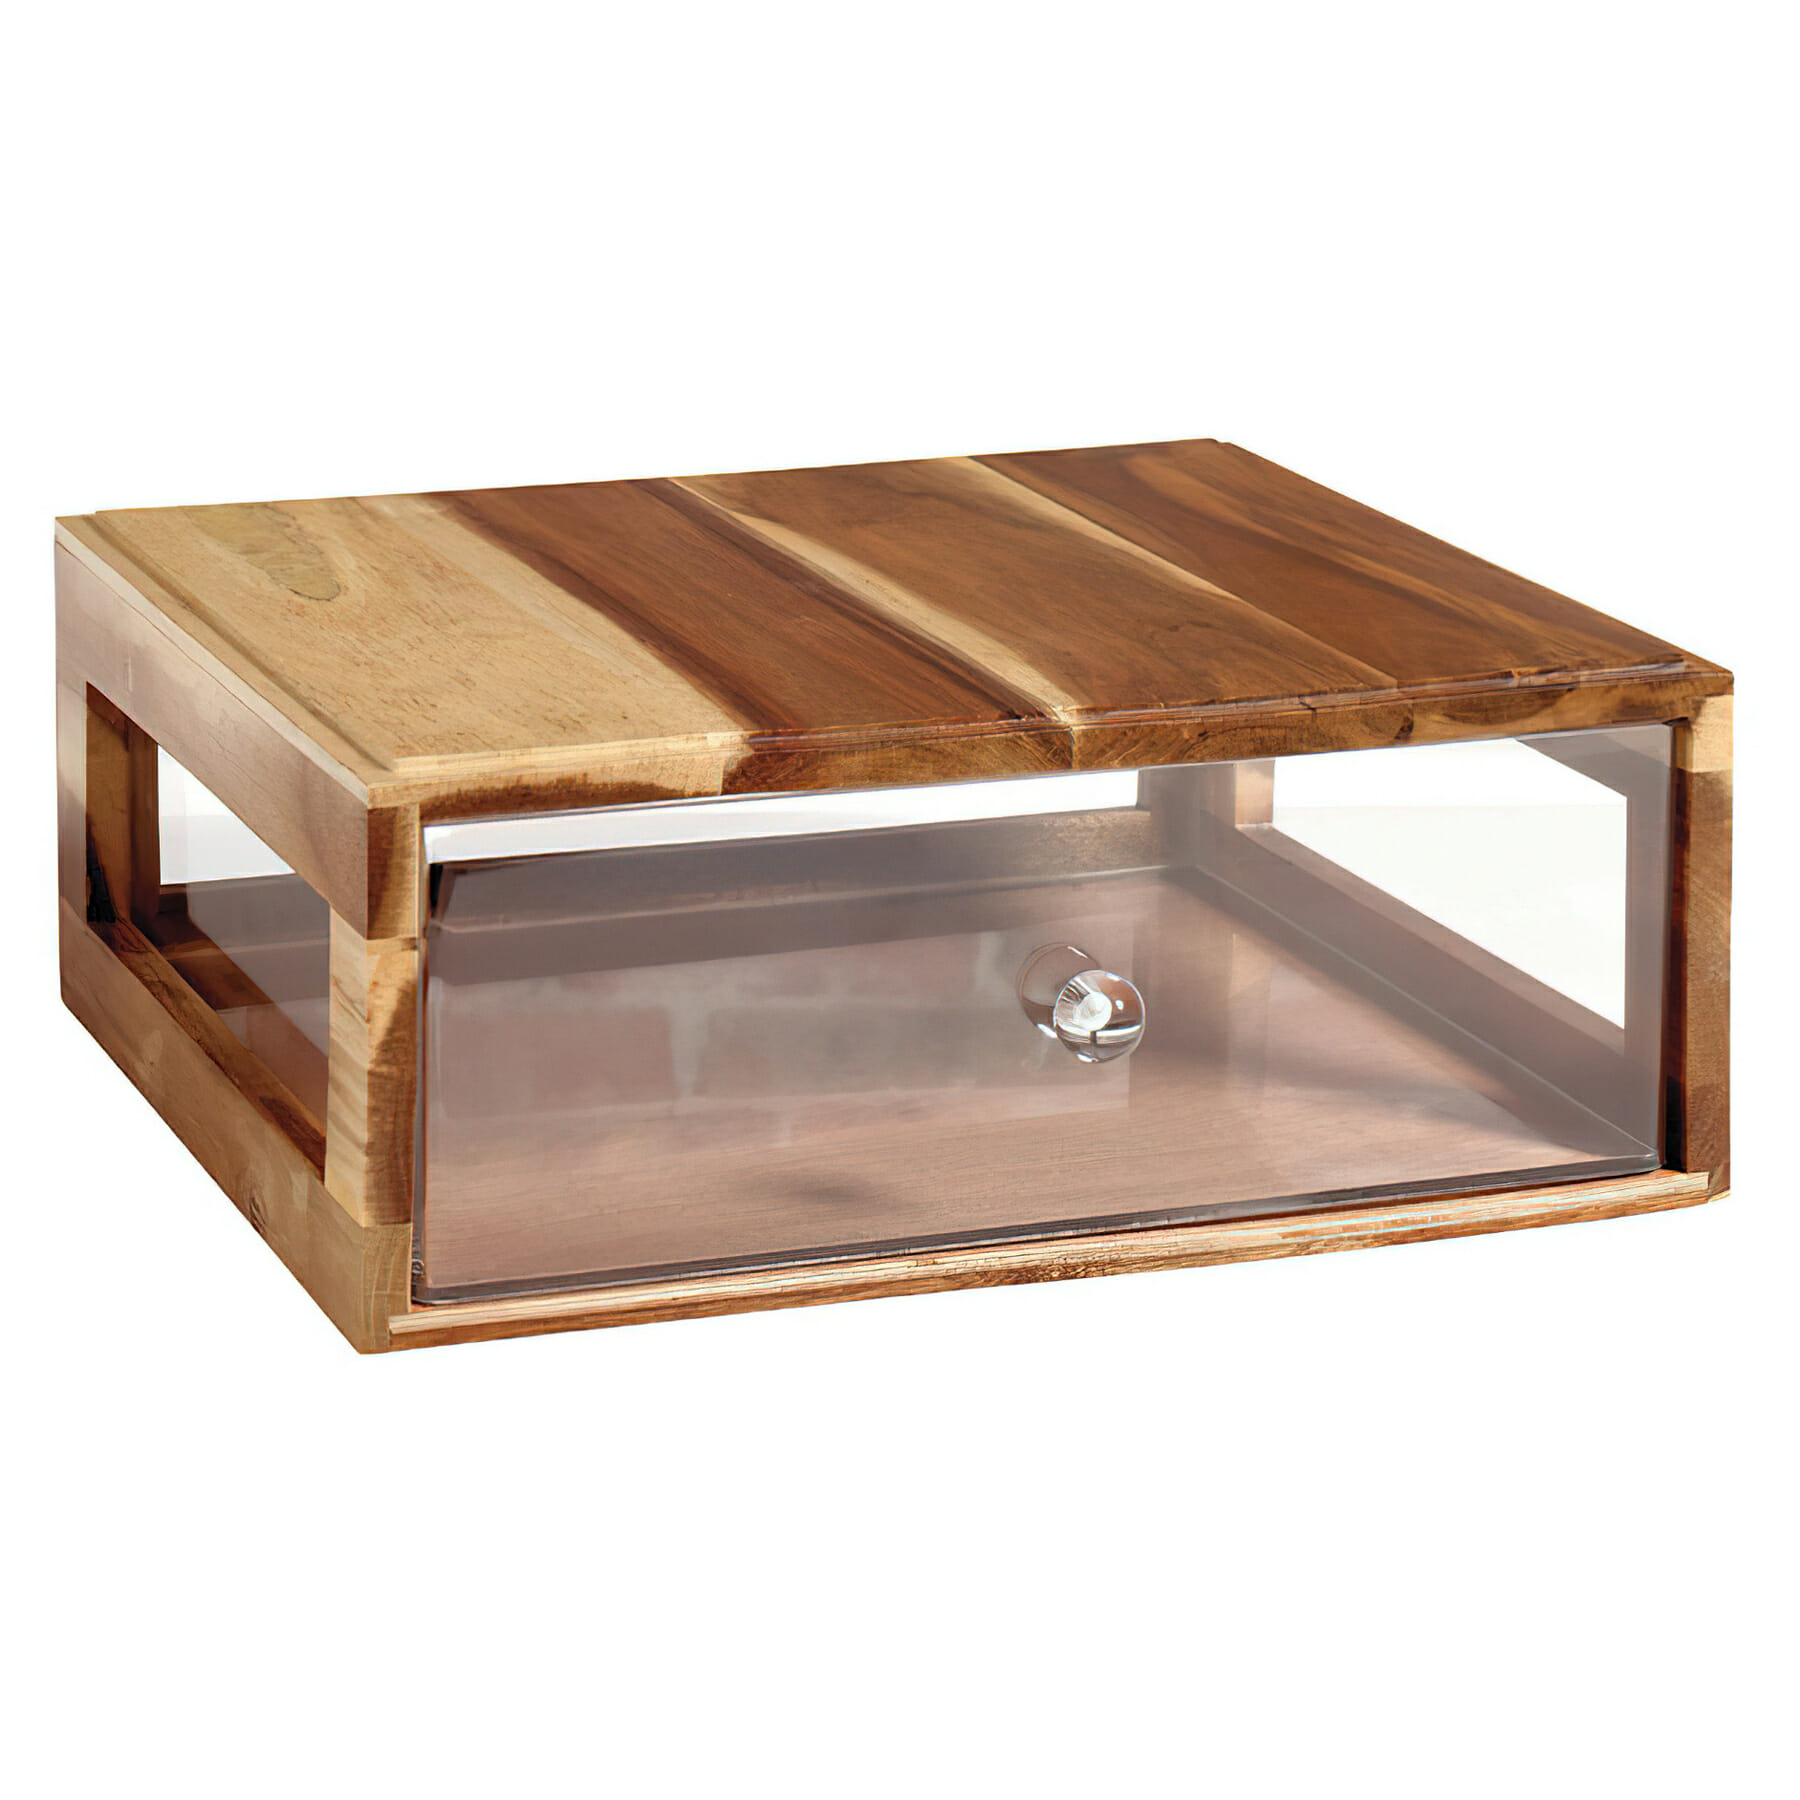 14.75" x 12.75" Rectangular Stackable Wood Bread Box with Acrylic Drawer, 5" tall